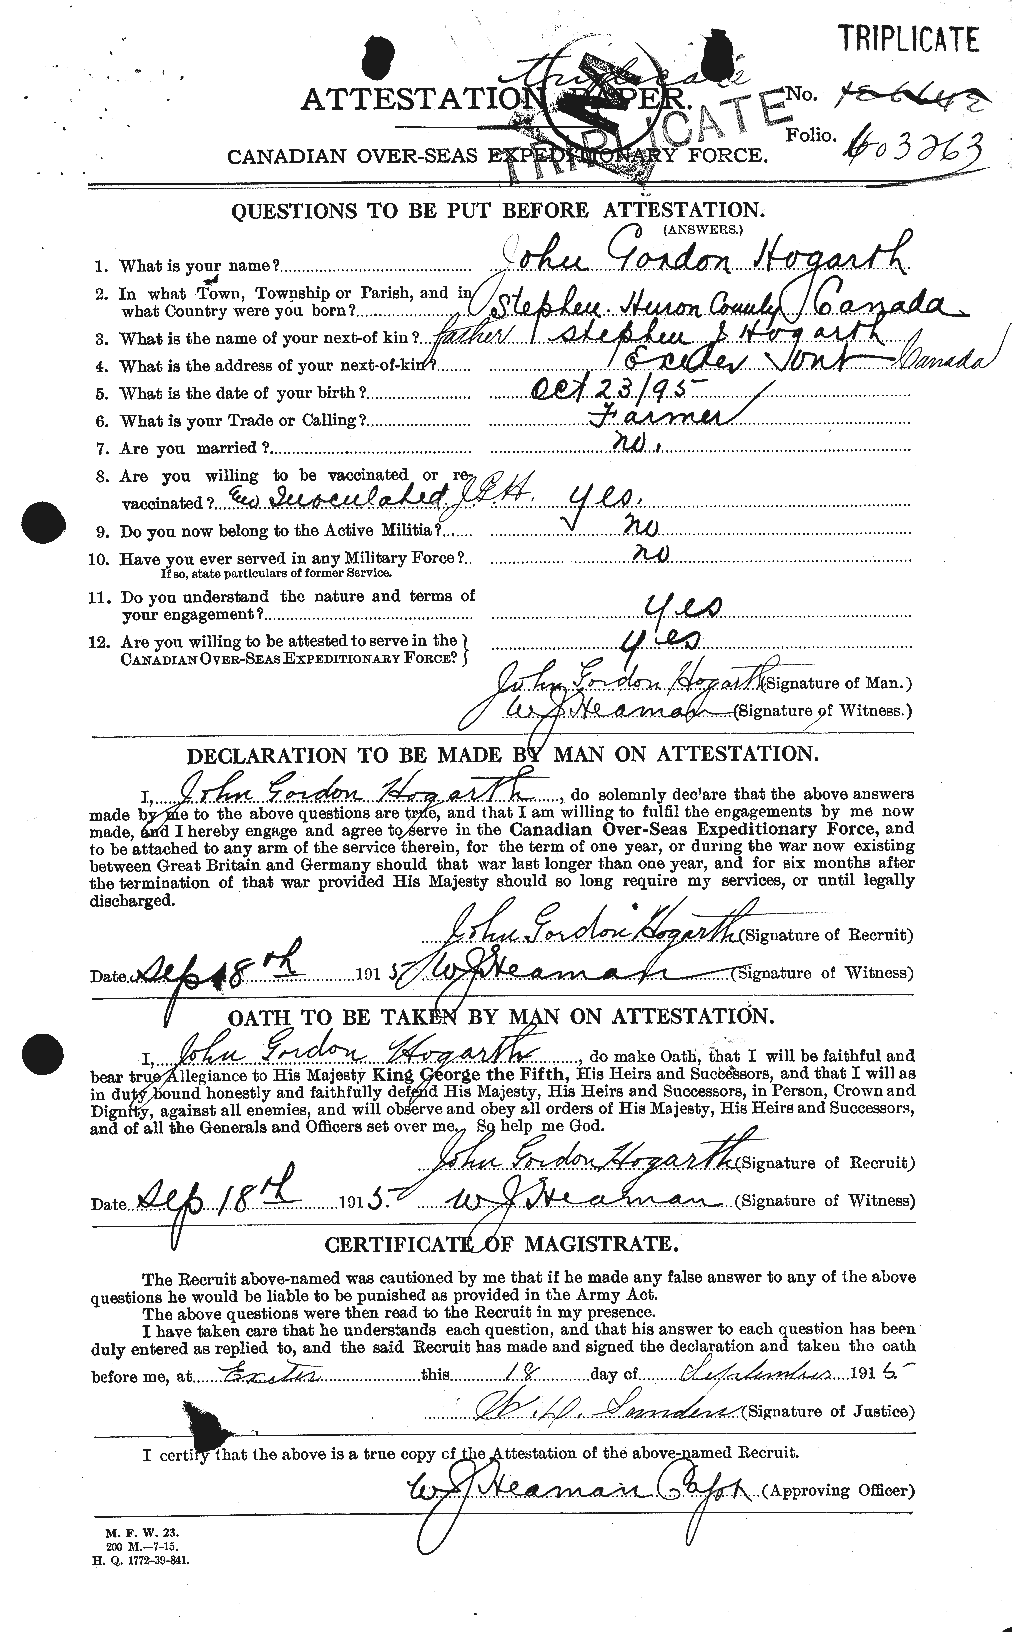 Personnel Records of the First World War - CEF 395156a